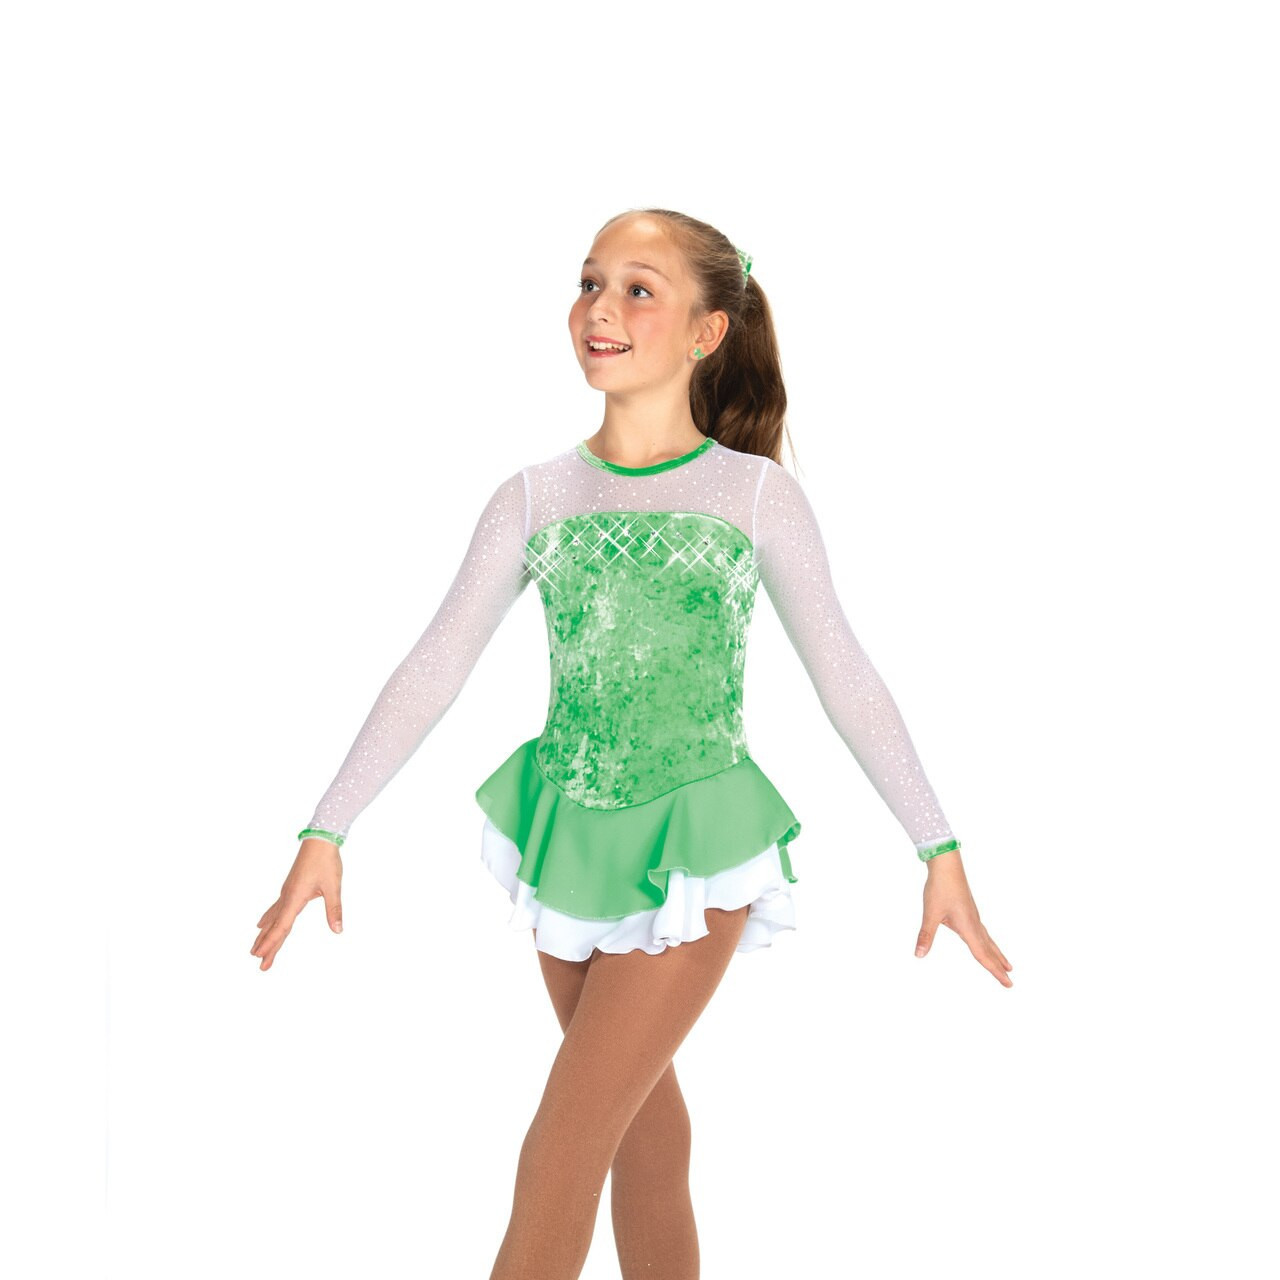 Jerry's Figure Skating Dress 60 (Youth 12-14, Light  